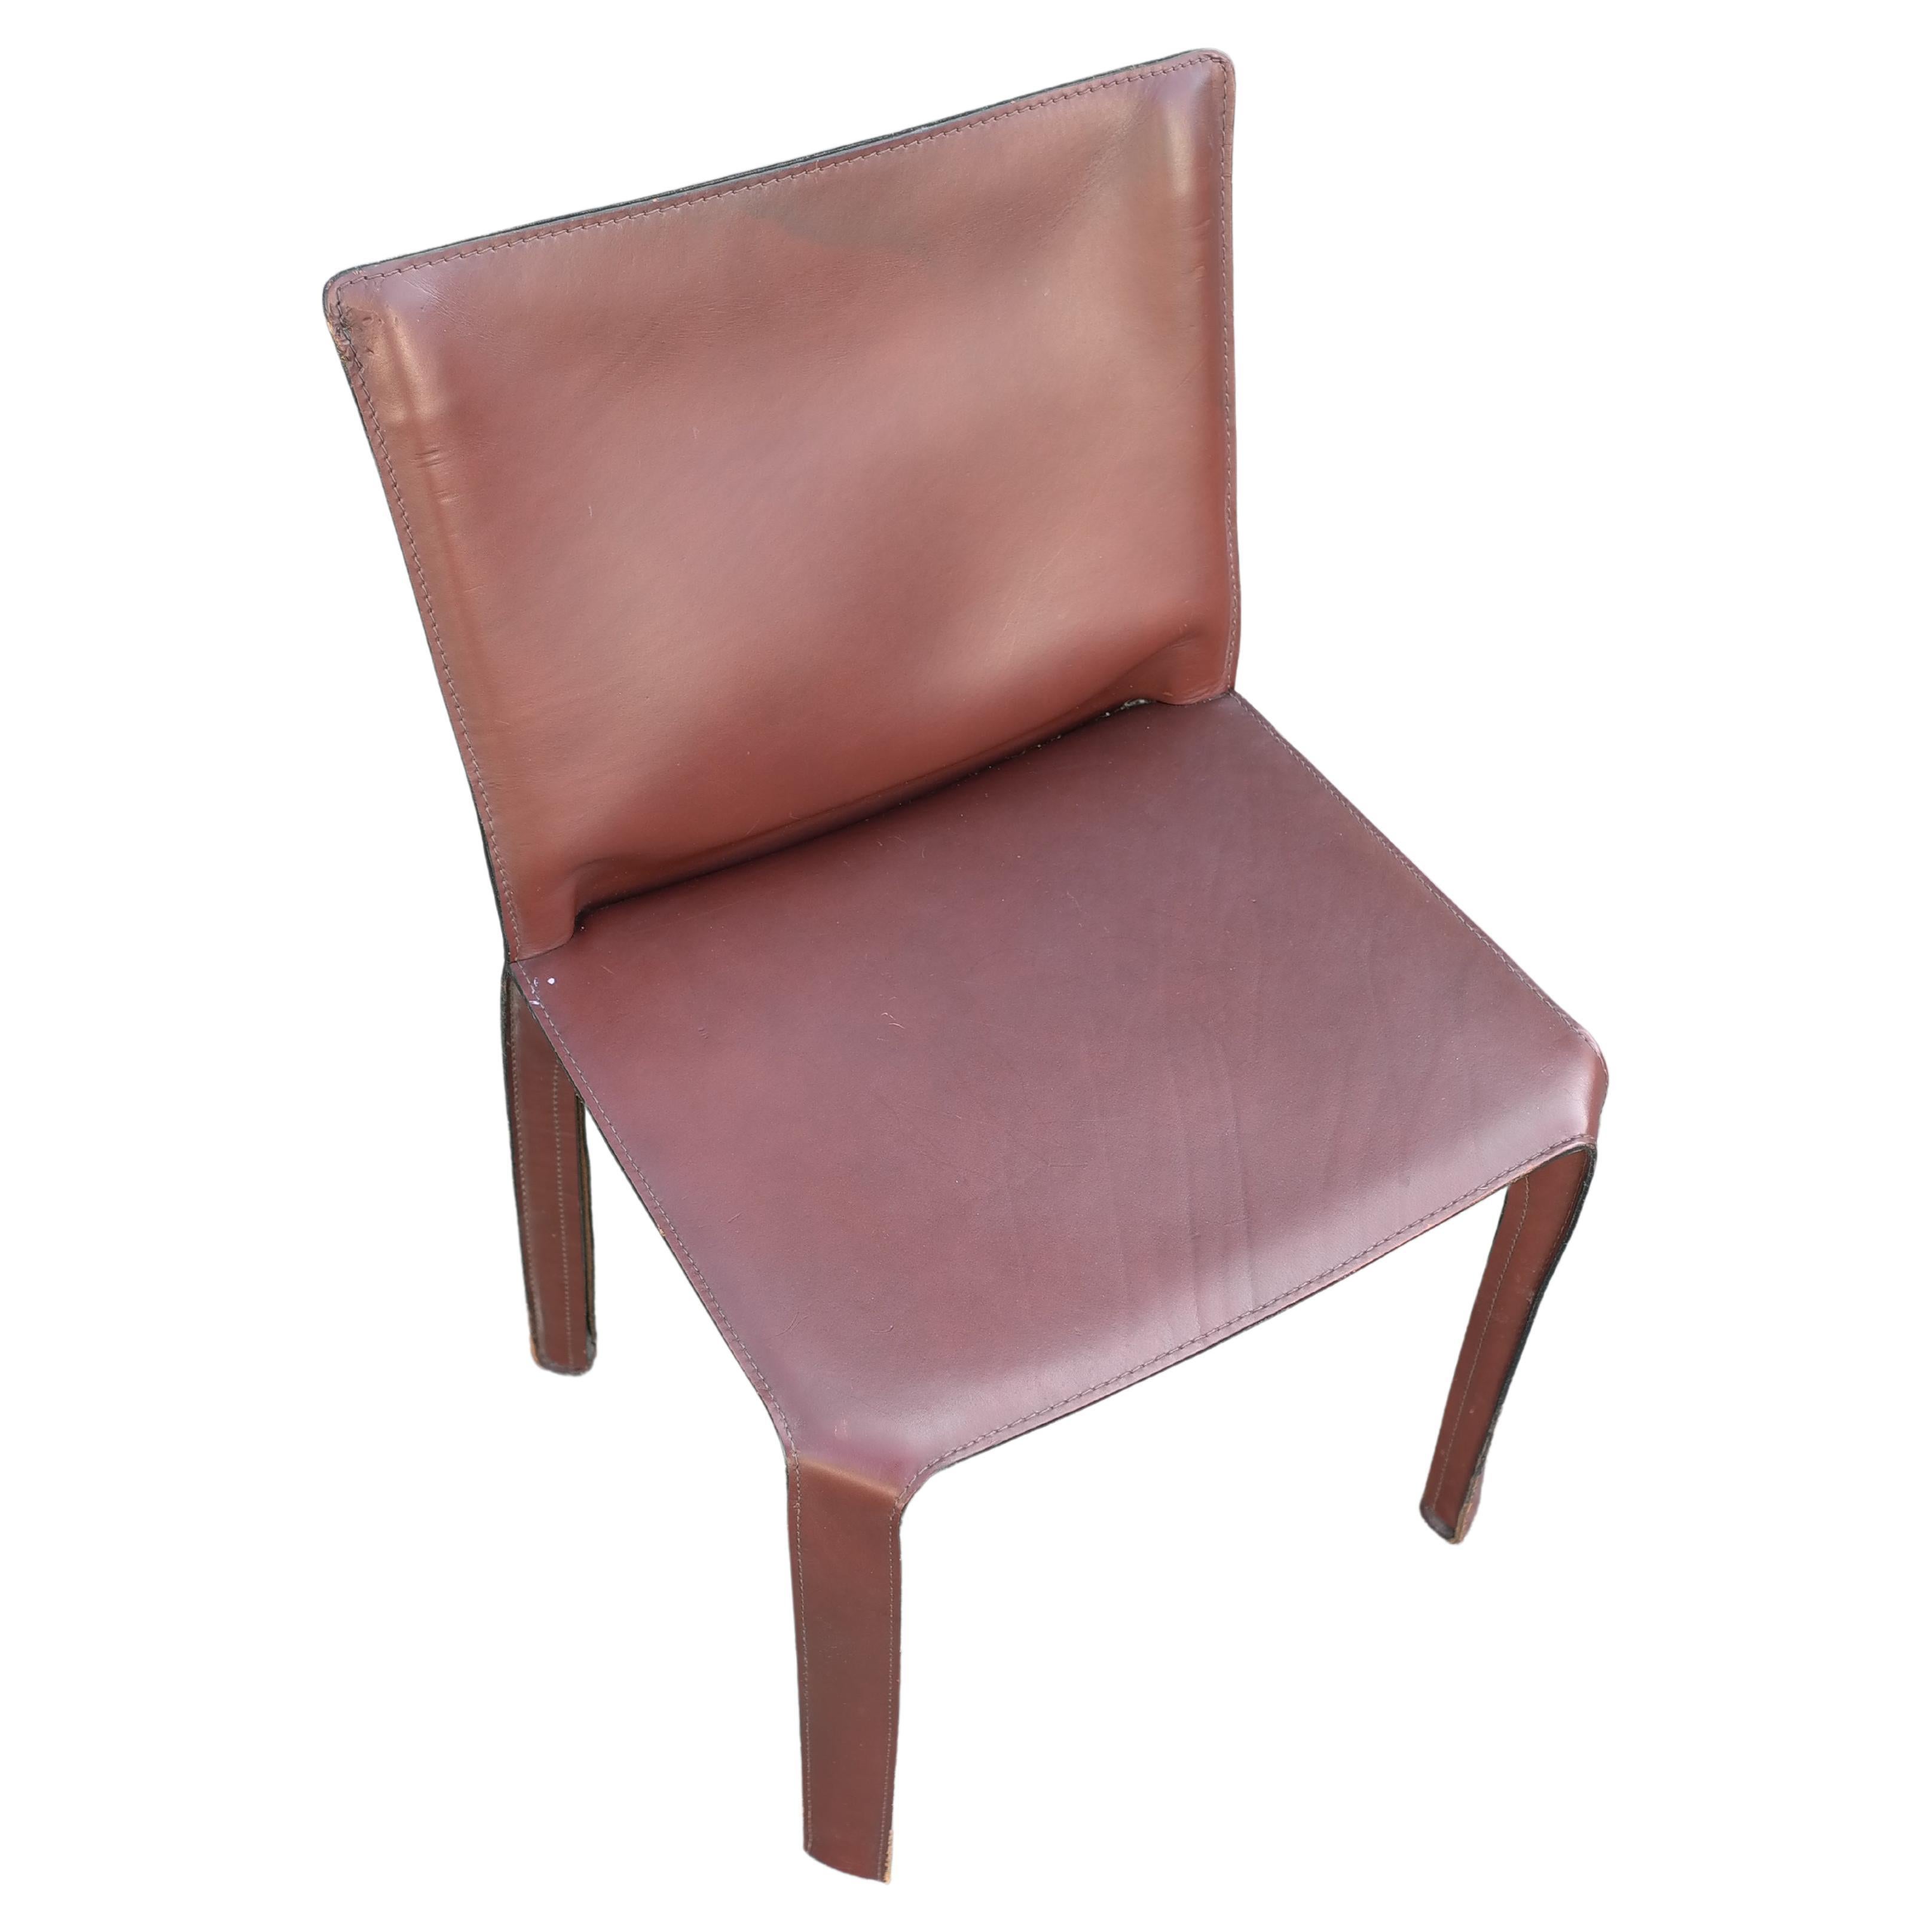 Pair of Chestnut Colored Cab Dining Chairs by Mario Bellini for Cassina In Good Condition For Sale In Den Haag, NL